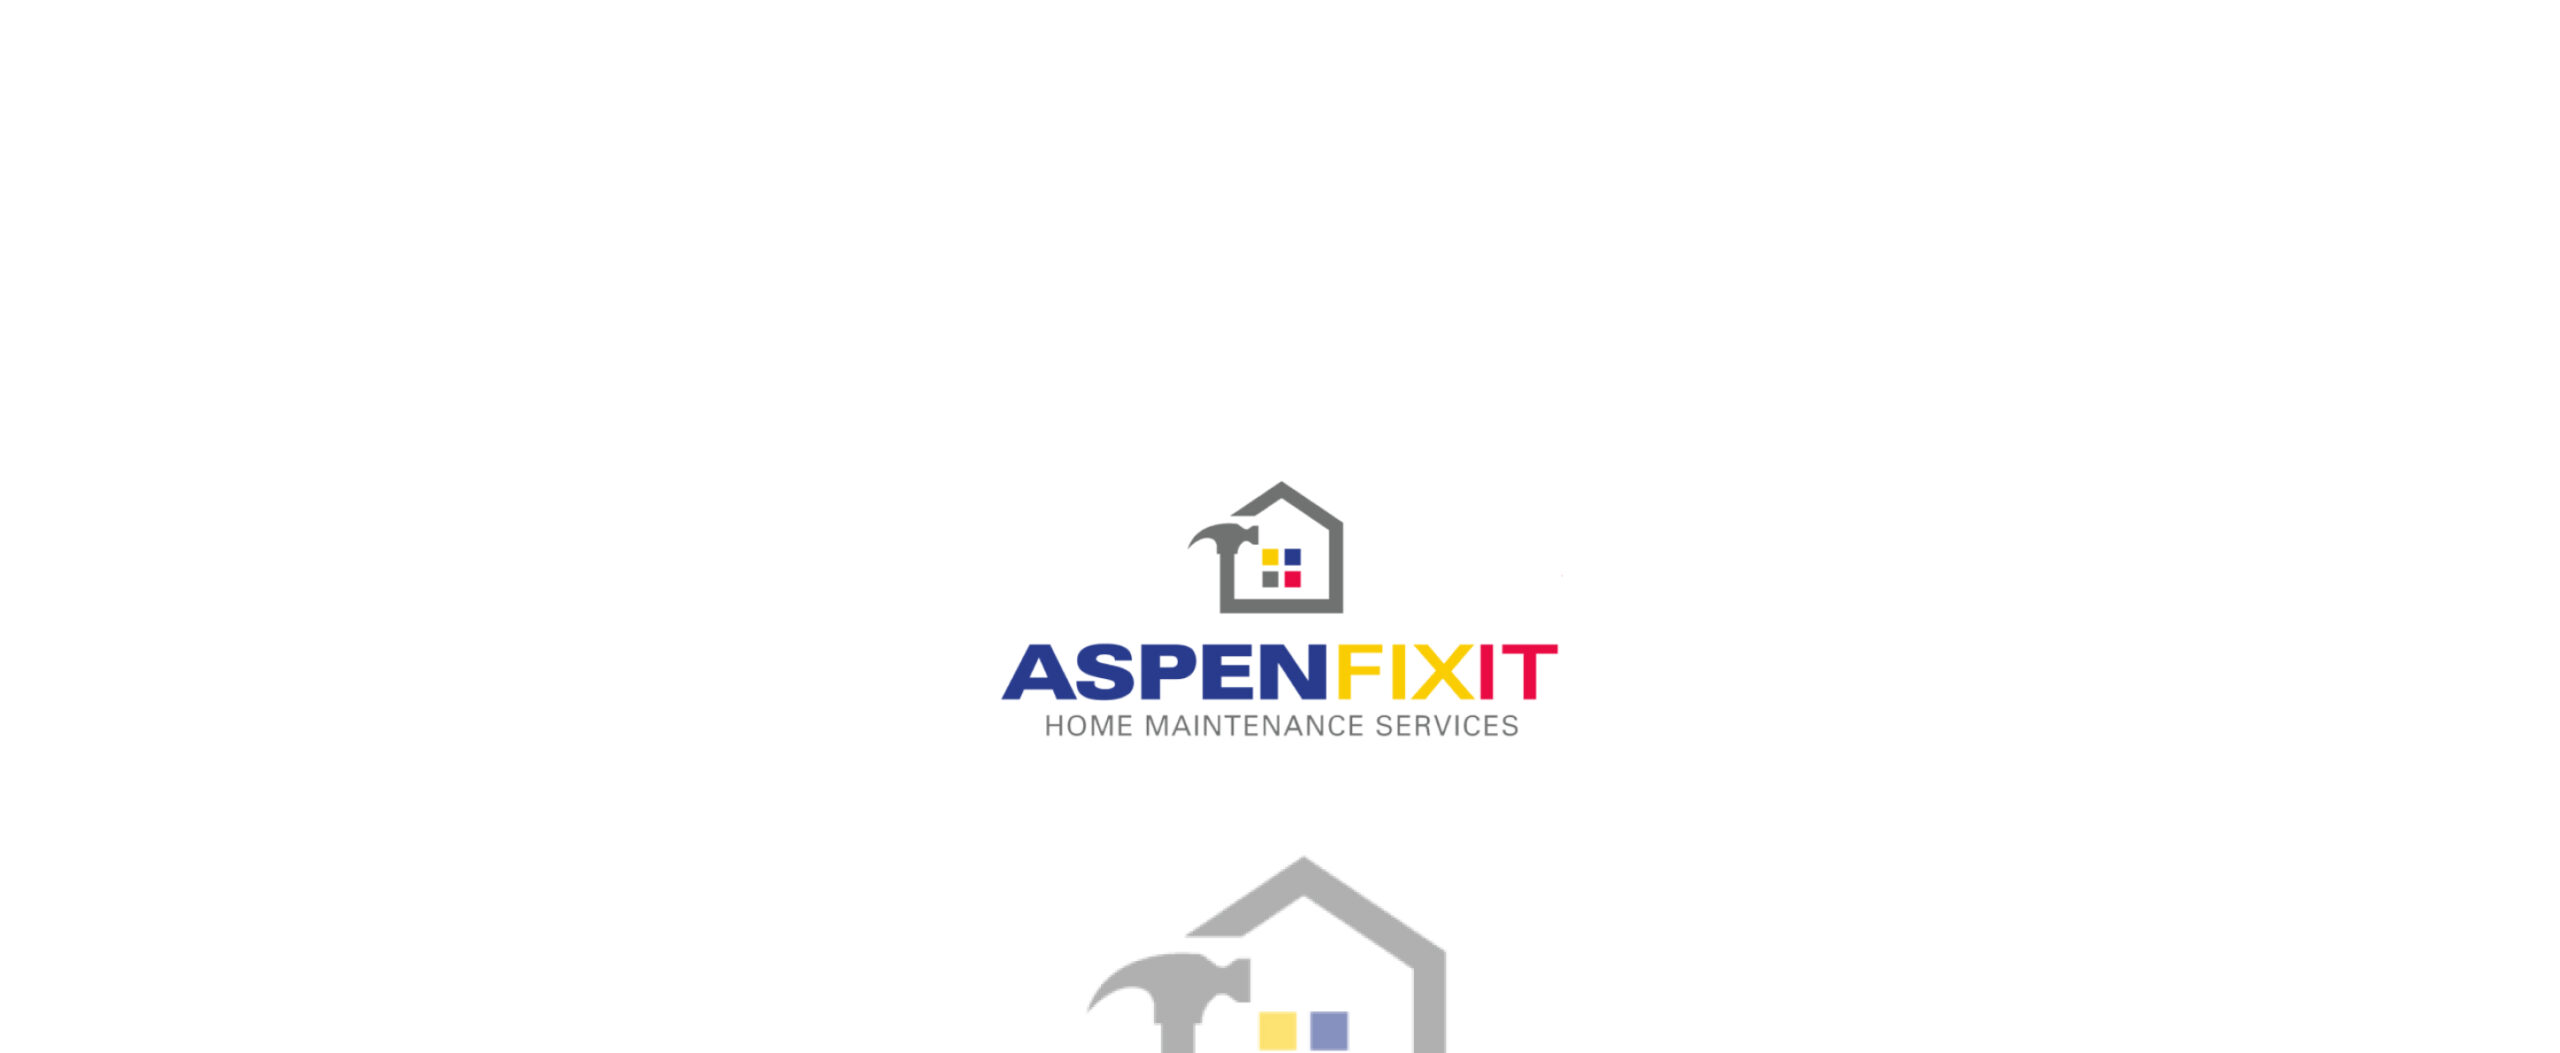 Logo for "aspenfixit home maintenance services" featuring a stylized house icon with a wrench and screwdriver.